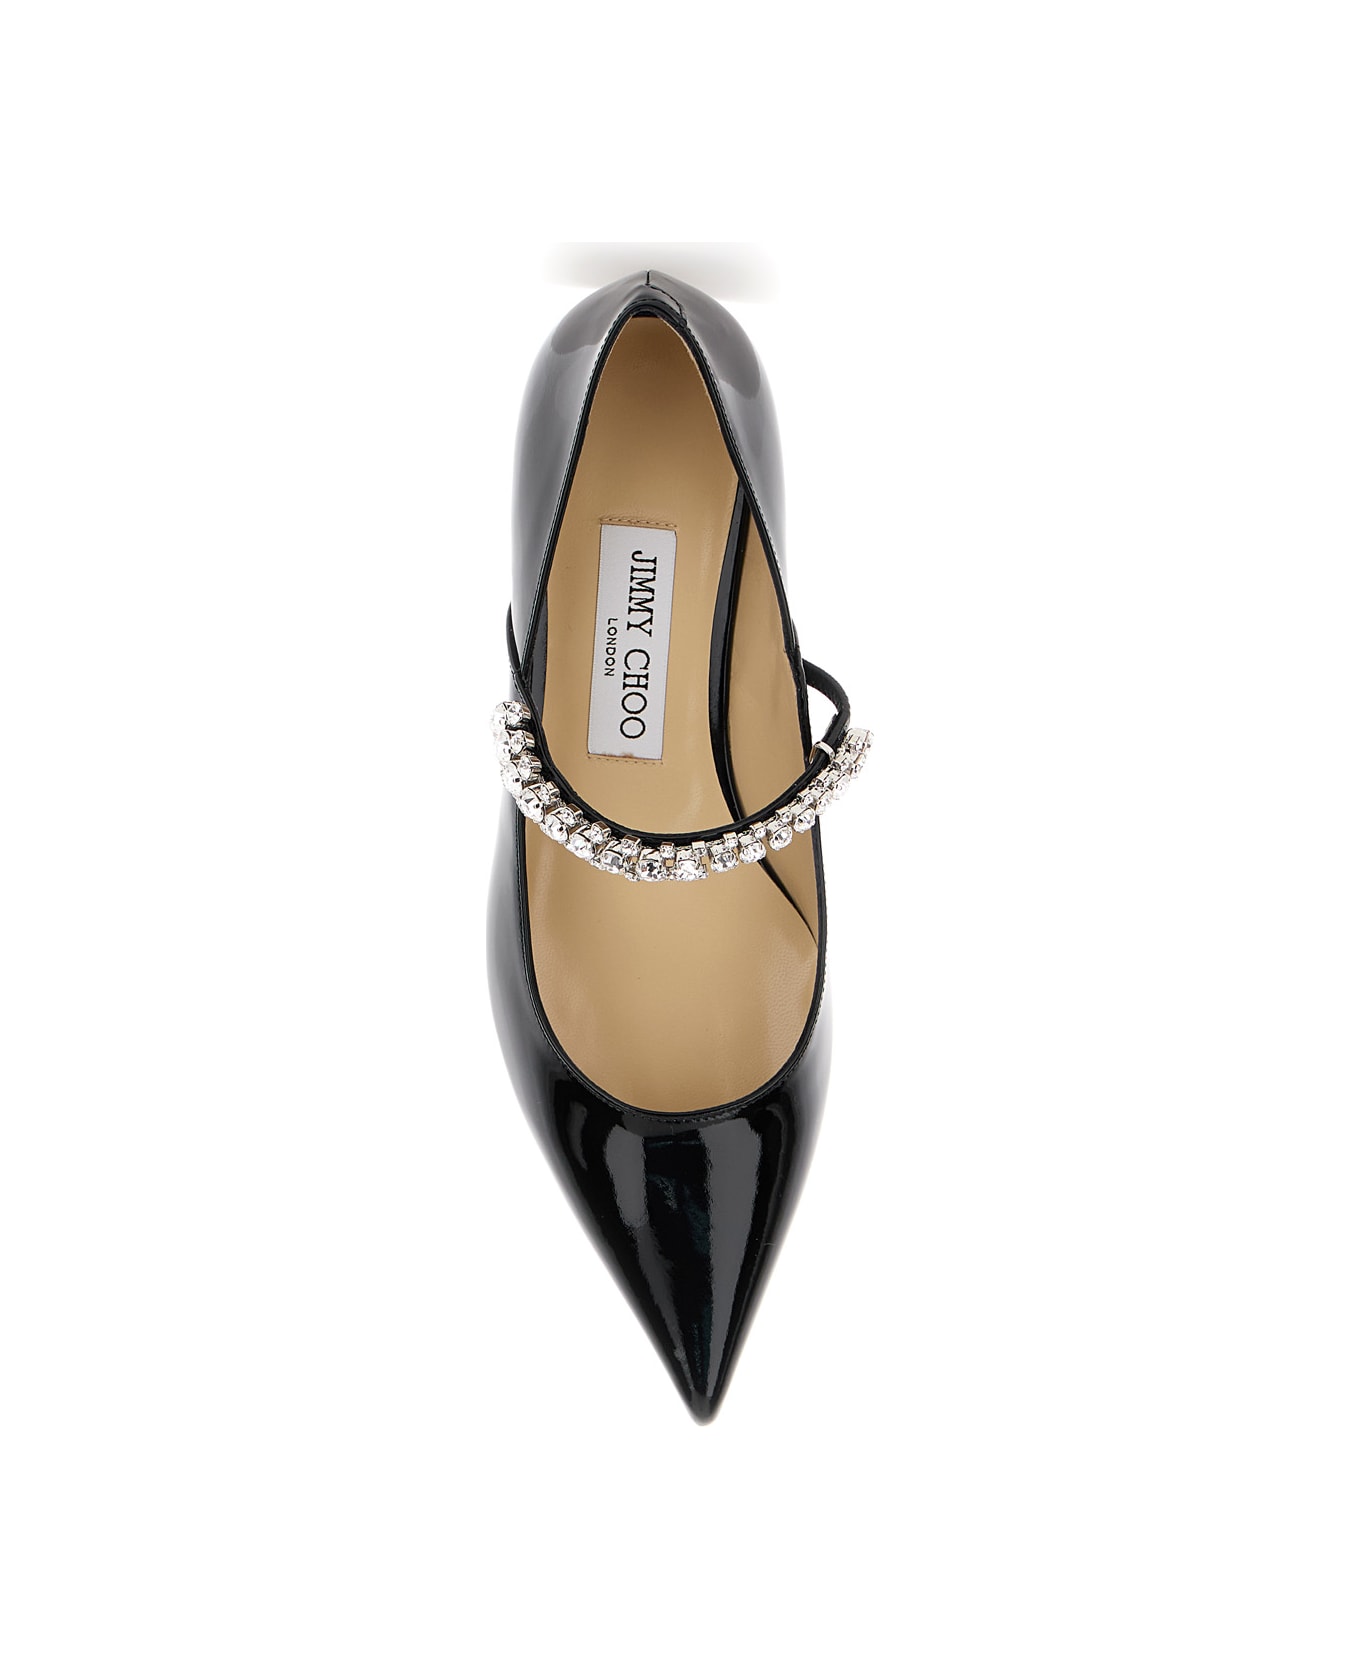 Jimmy Choo Black Ballet Flats With Crystals On Strap In Patent Leather Woman - Black